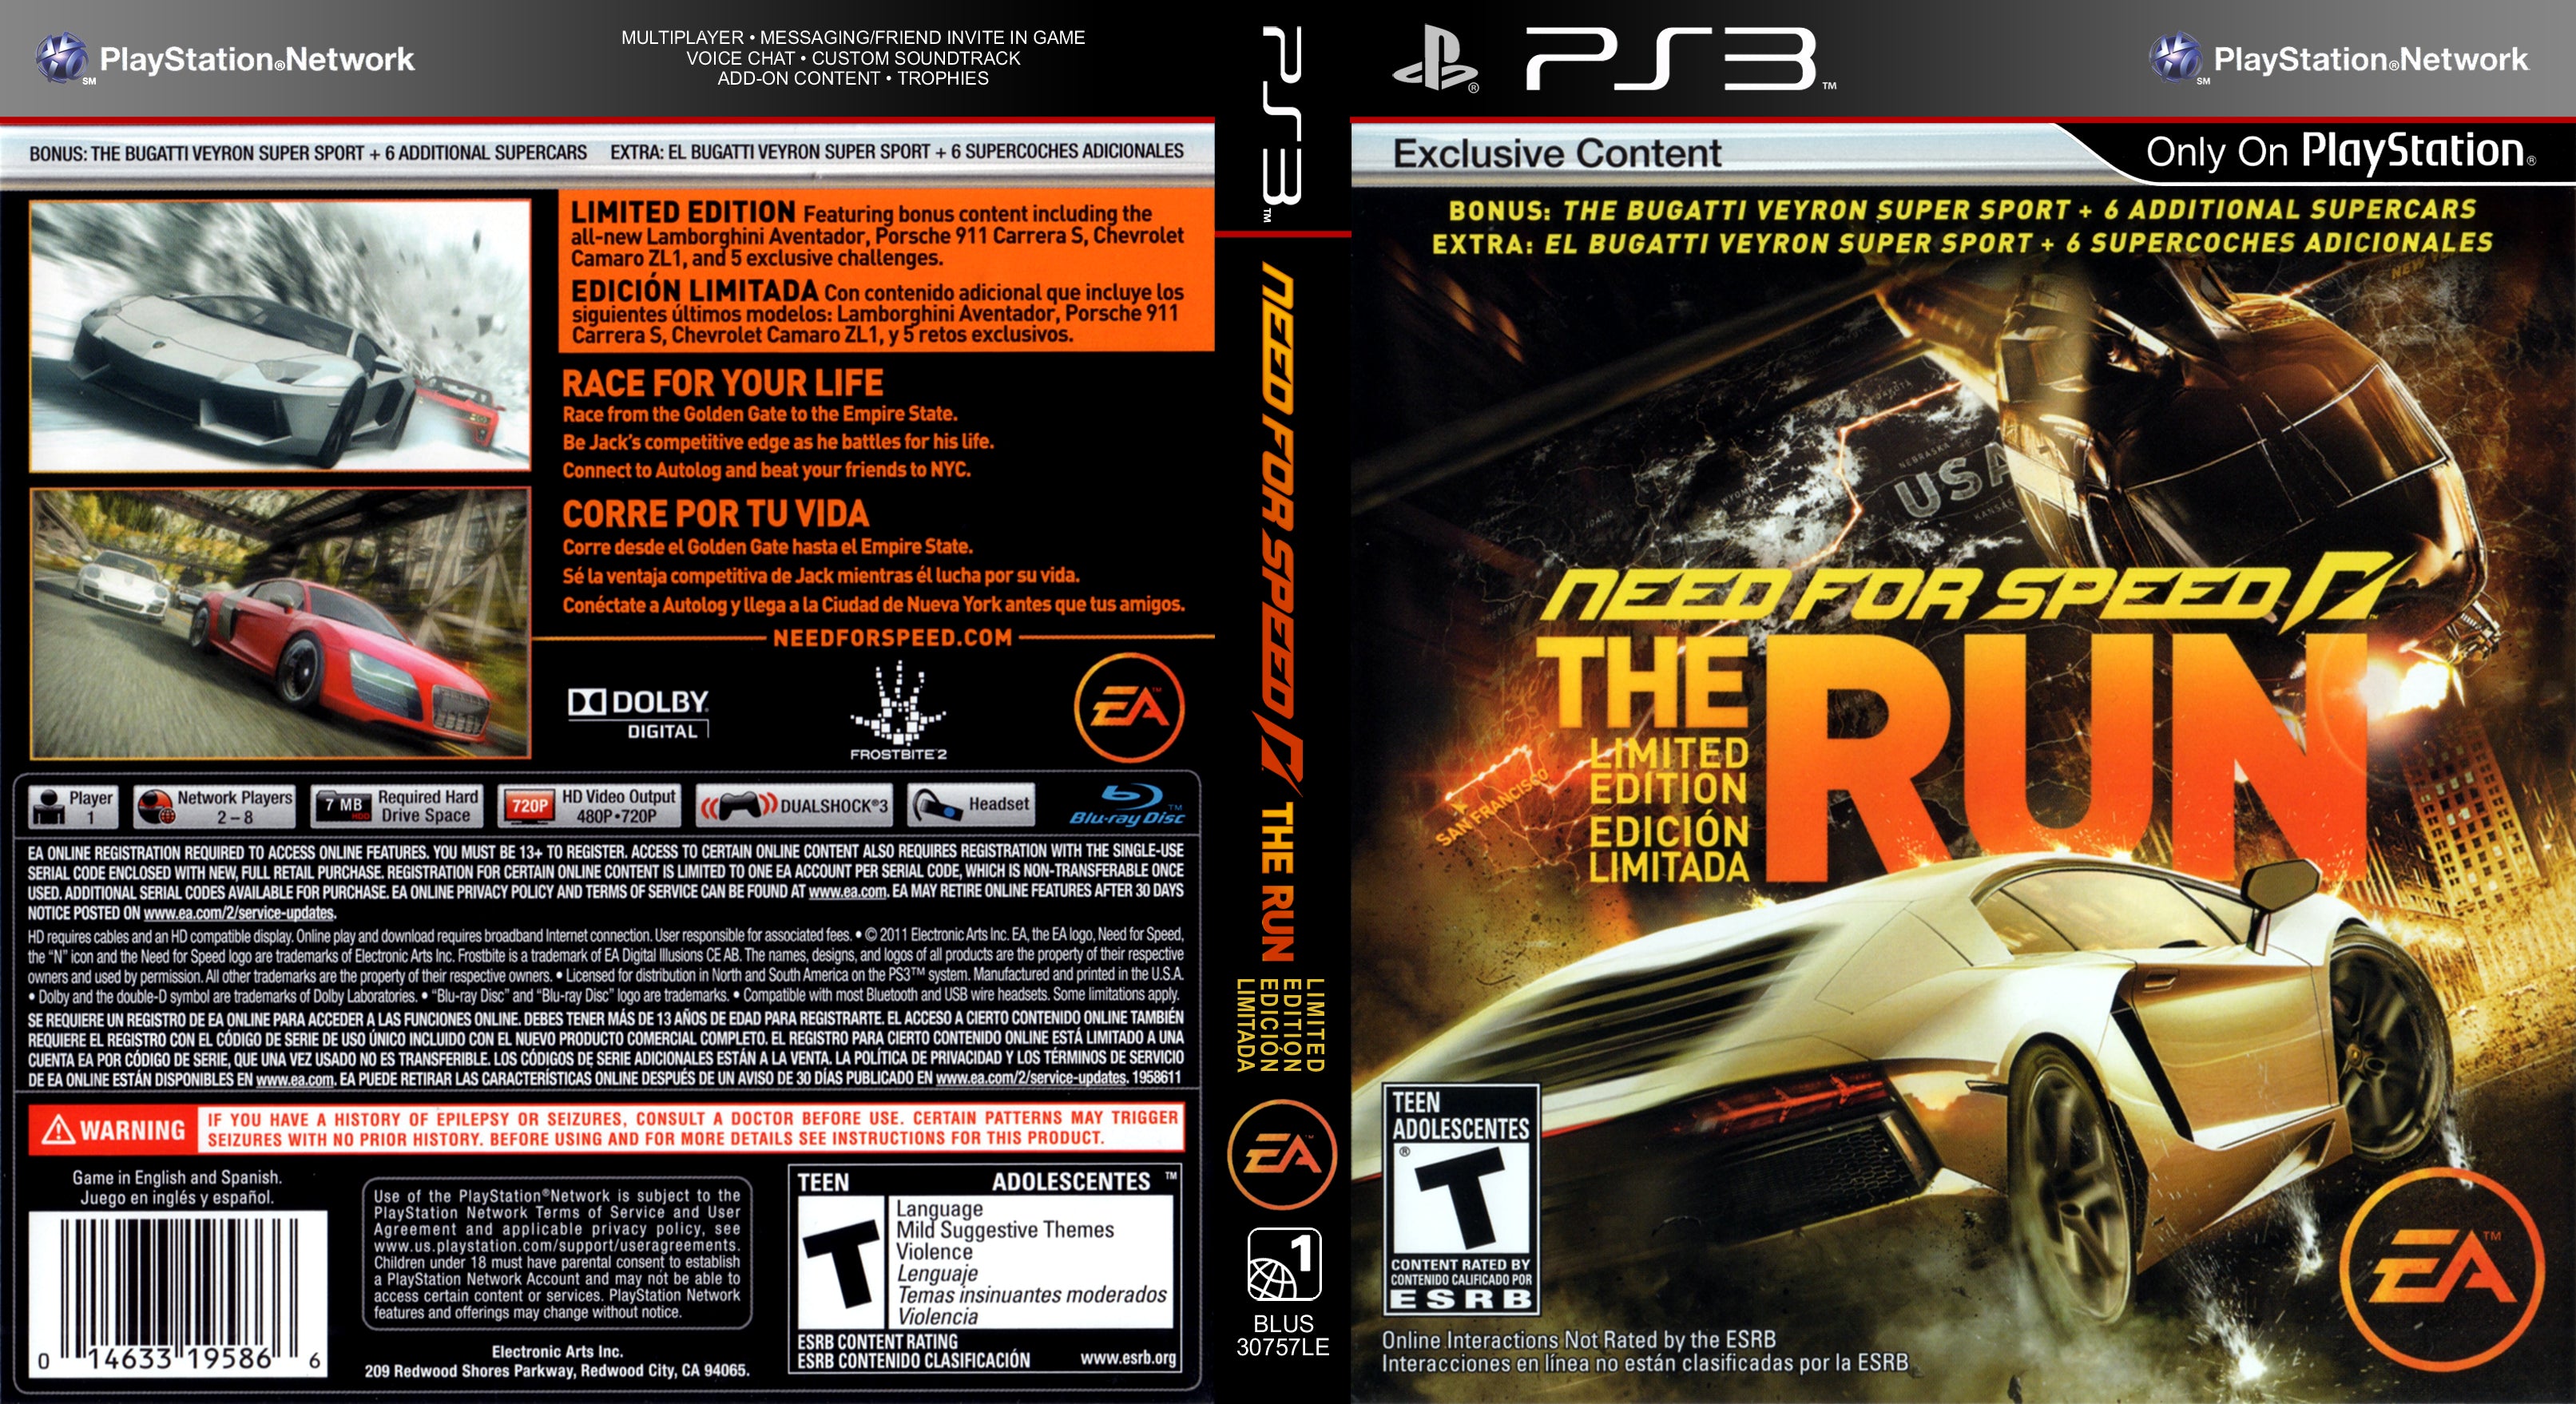 Need For Speed: The Run - Video Games » Sony » Playstation 3 - Game Citadel